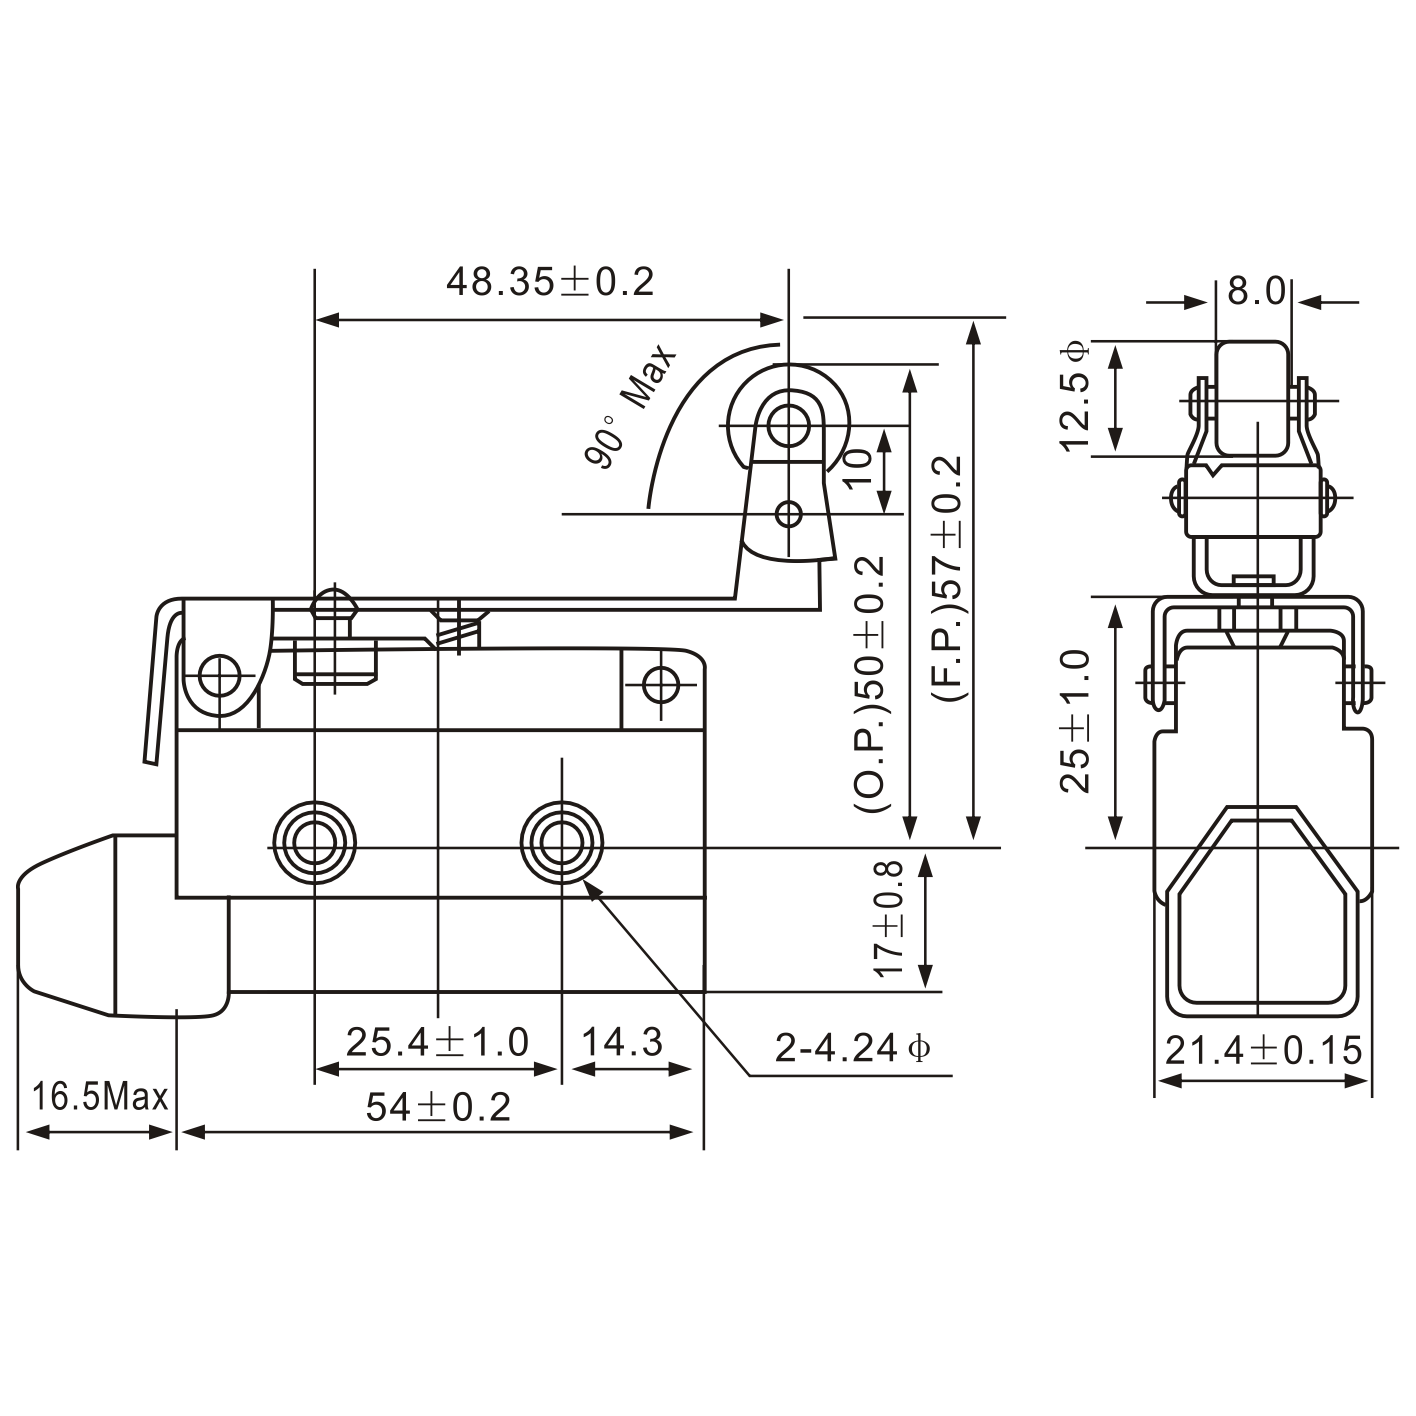 AZ-7124 Angled Lever with Roller Limit Switch Diagram